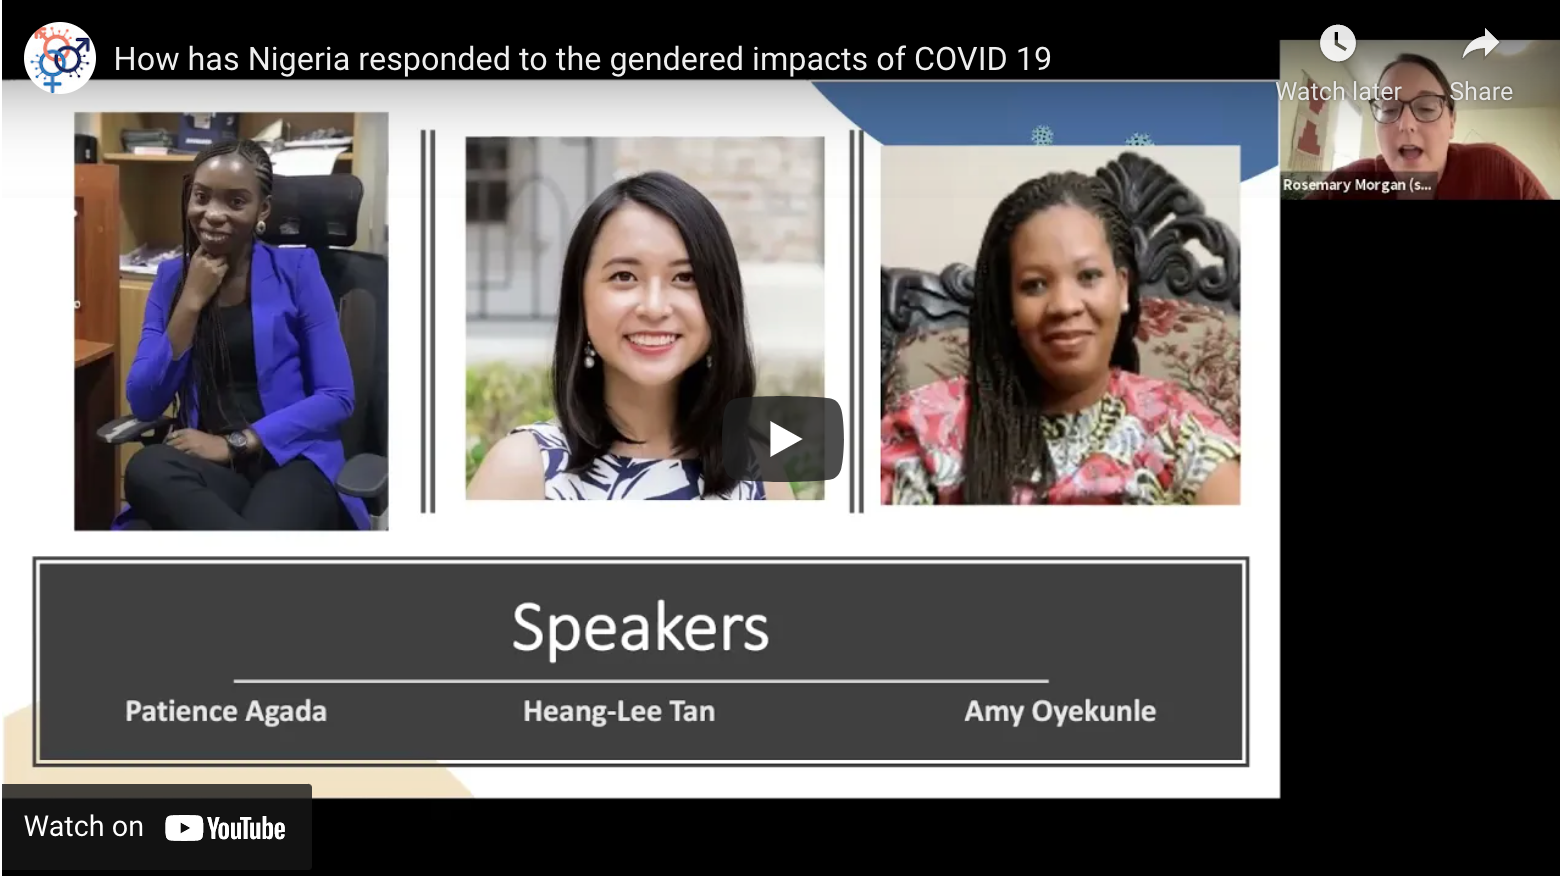 Learning from Nigeria: How they responded to the gendered impacts of COVID-19